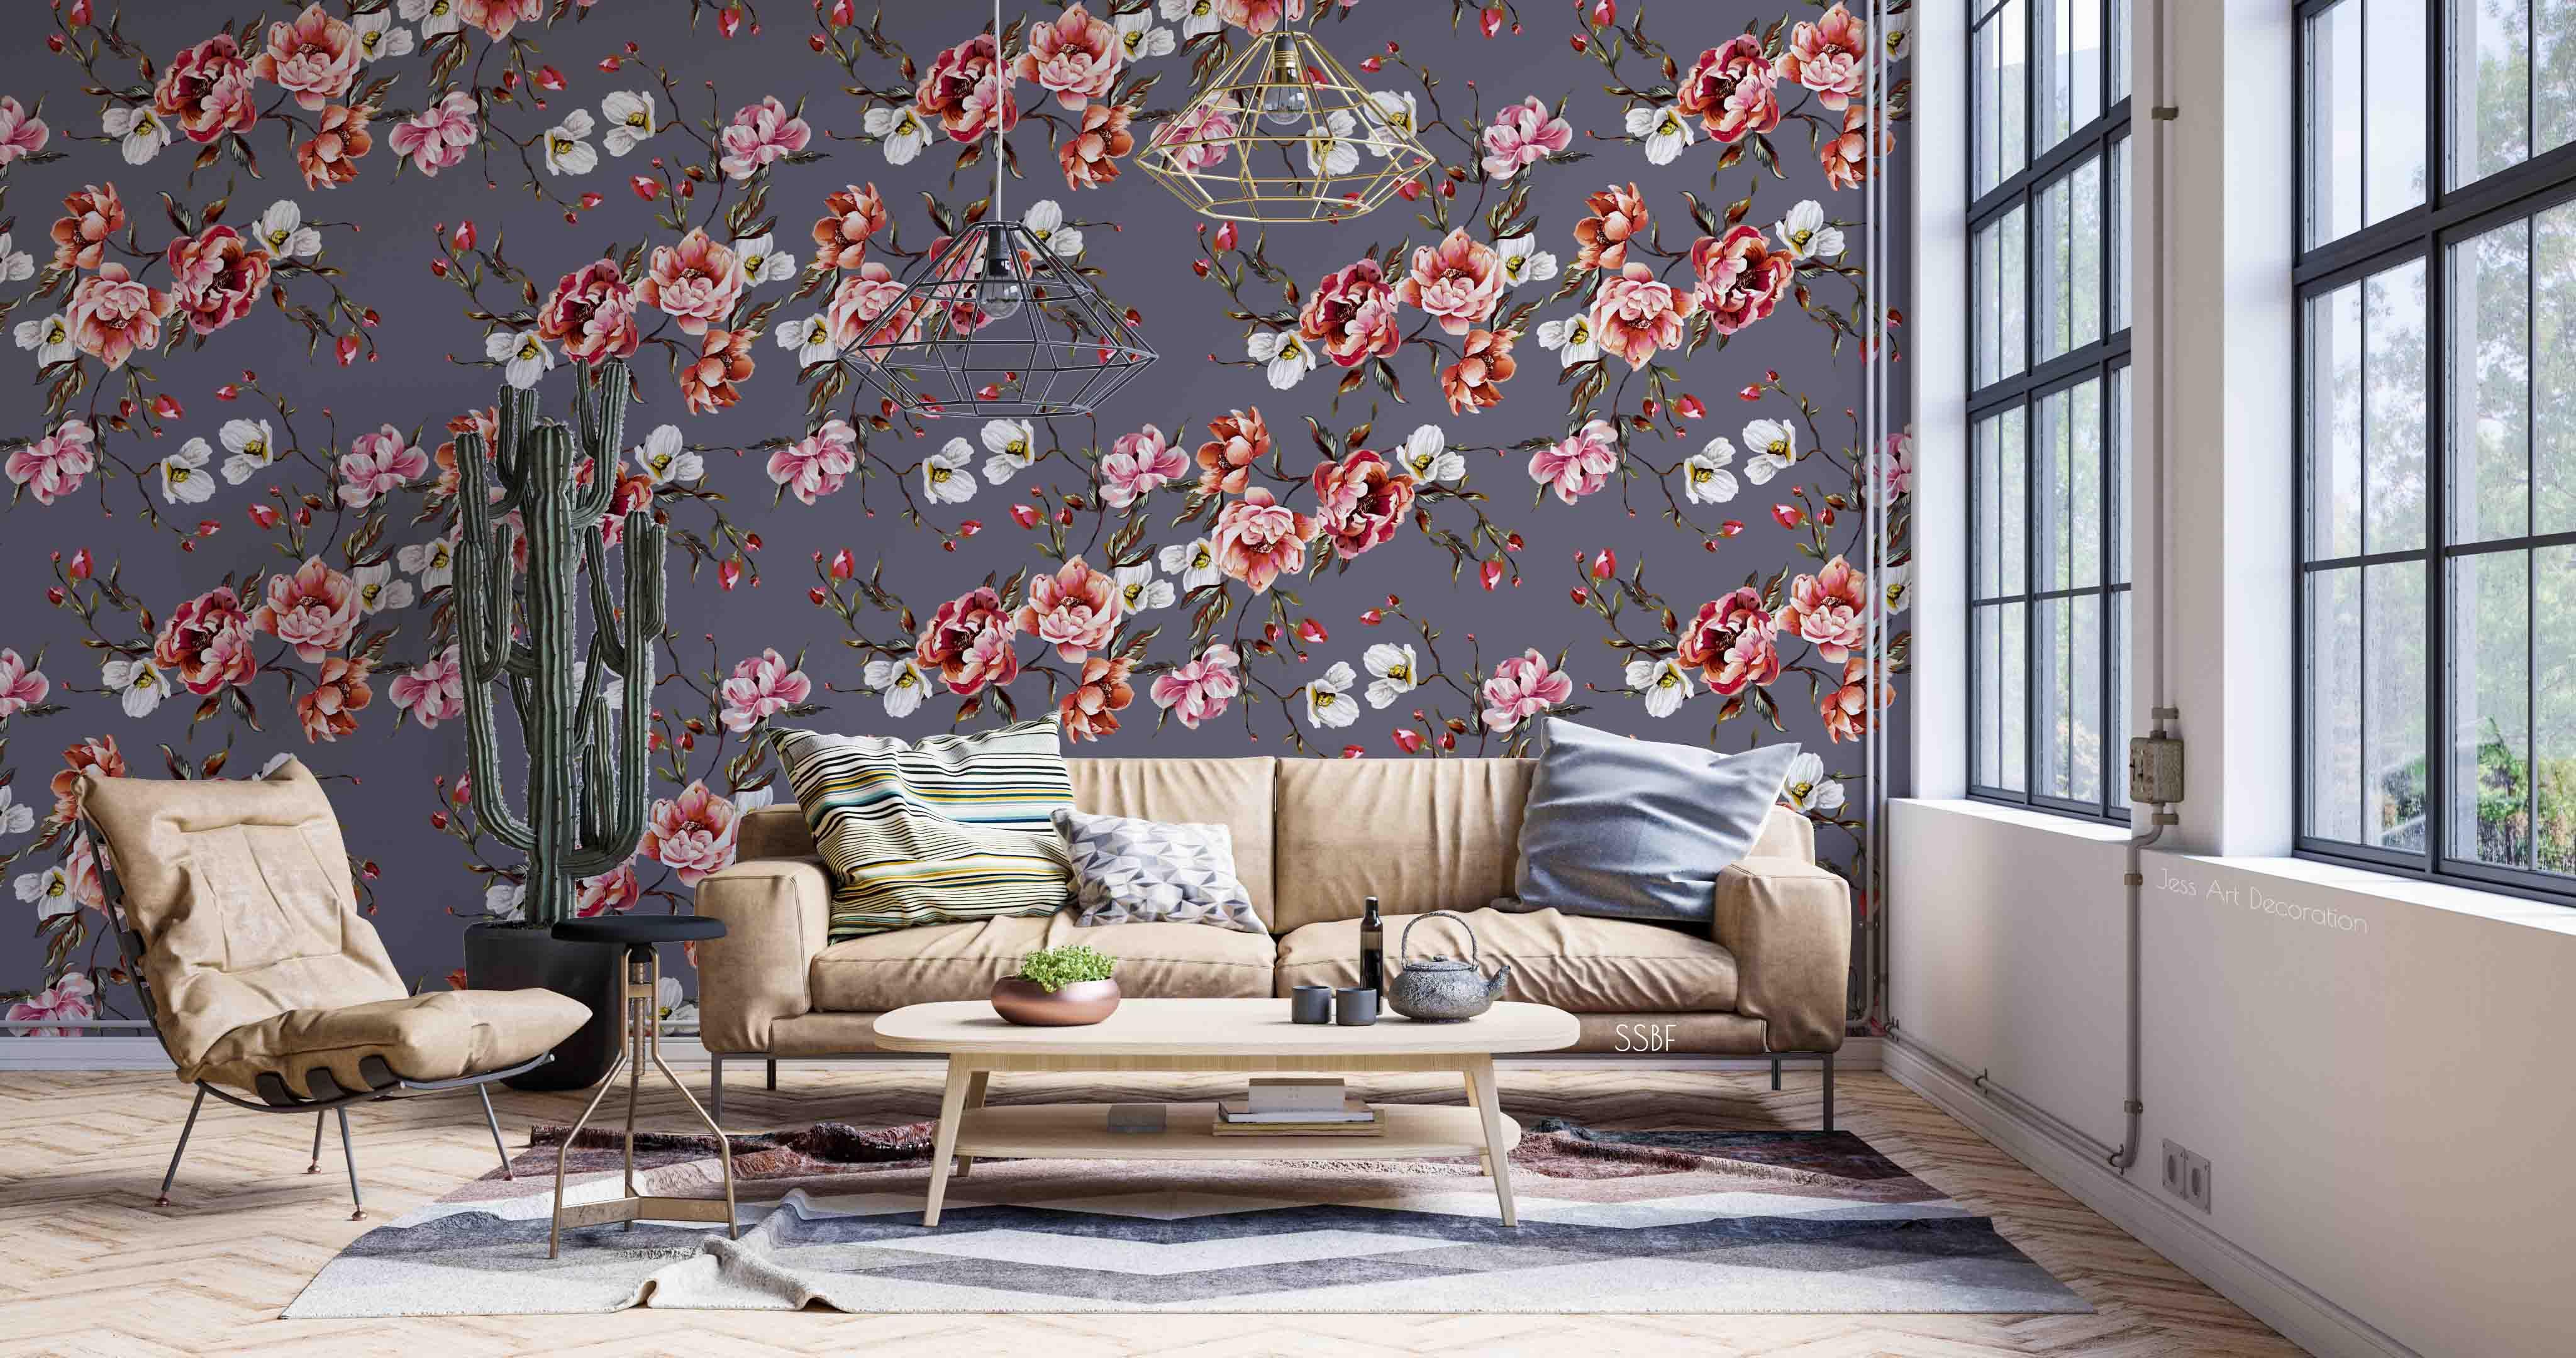 3D Vintage Baroque Art Blooming Pink Peony Background Wall Mural Wallpaper GD 3575- Jess Art Decoration